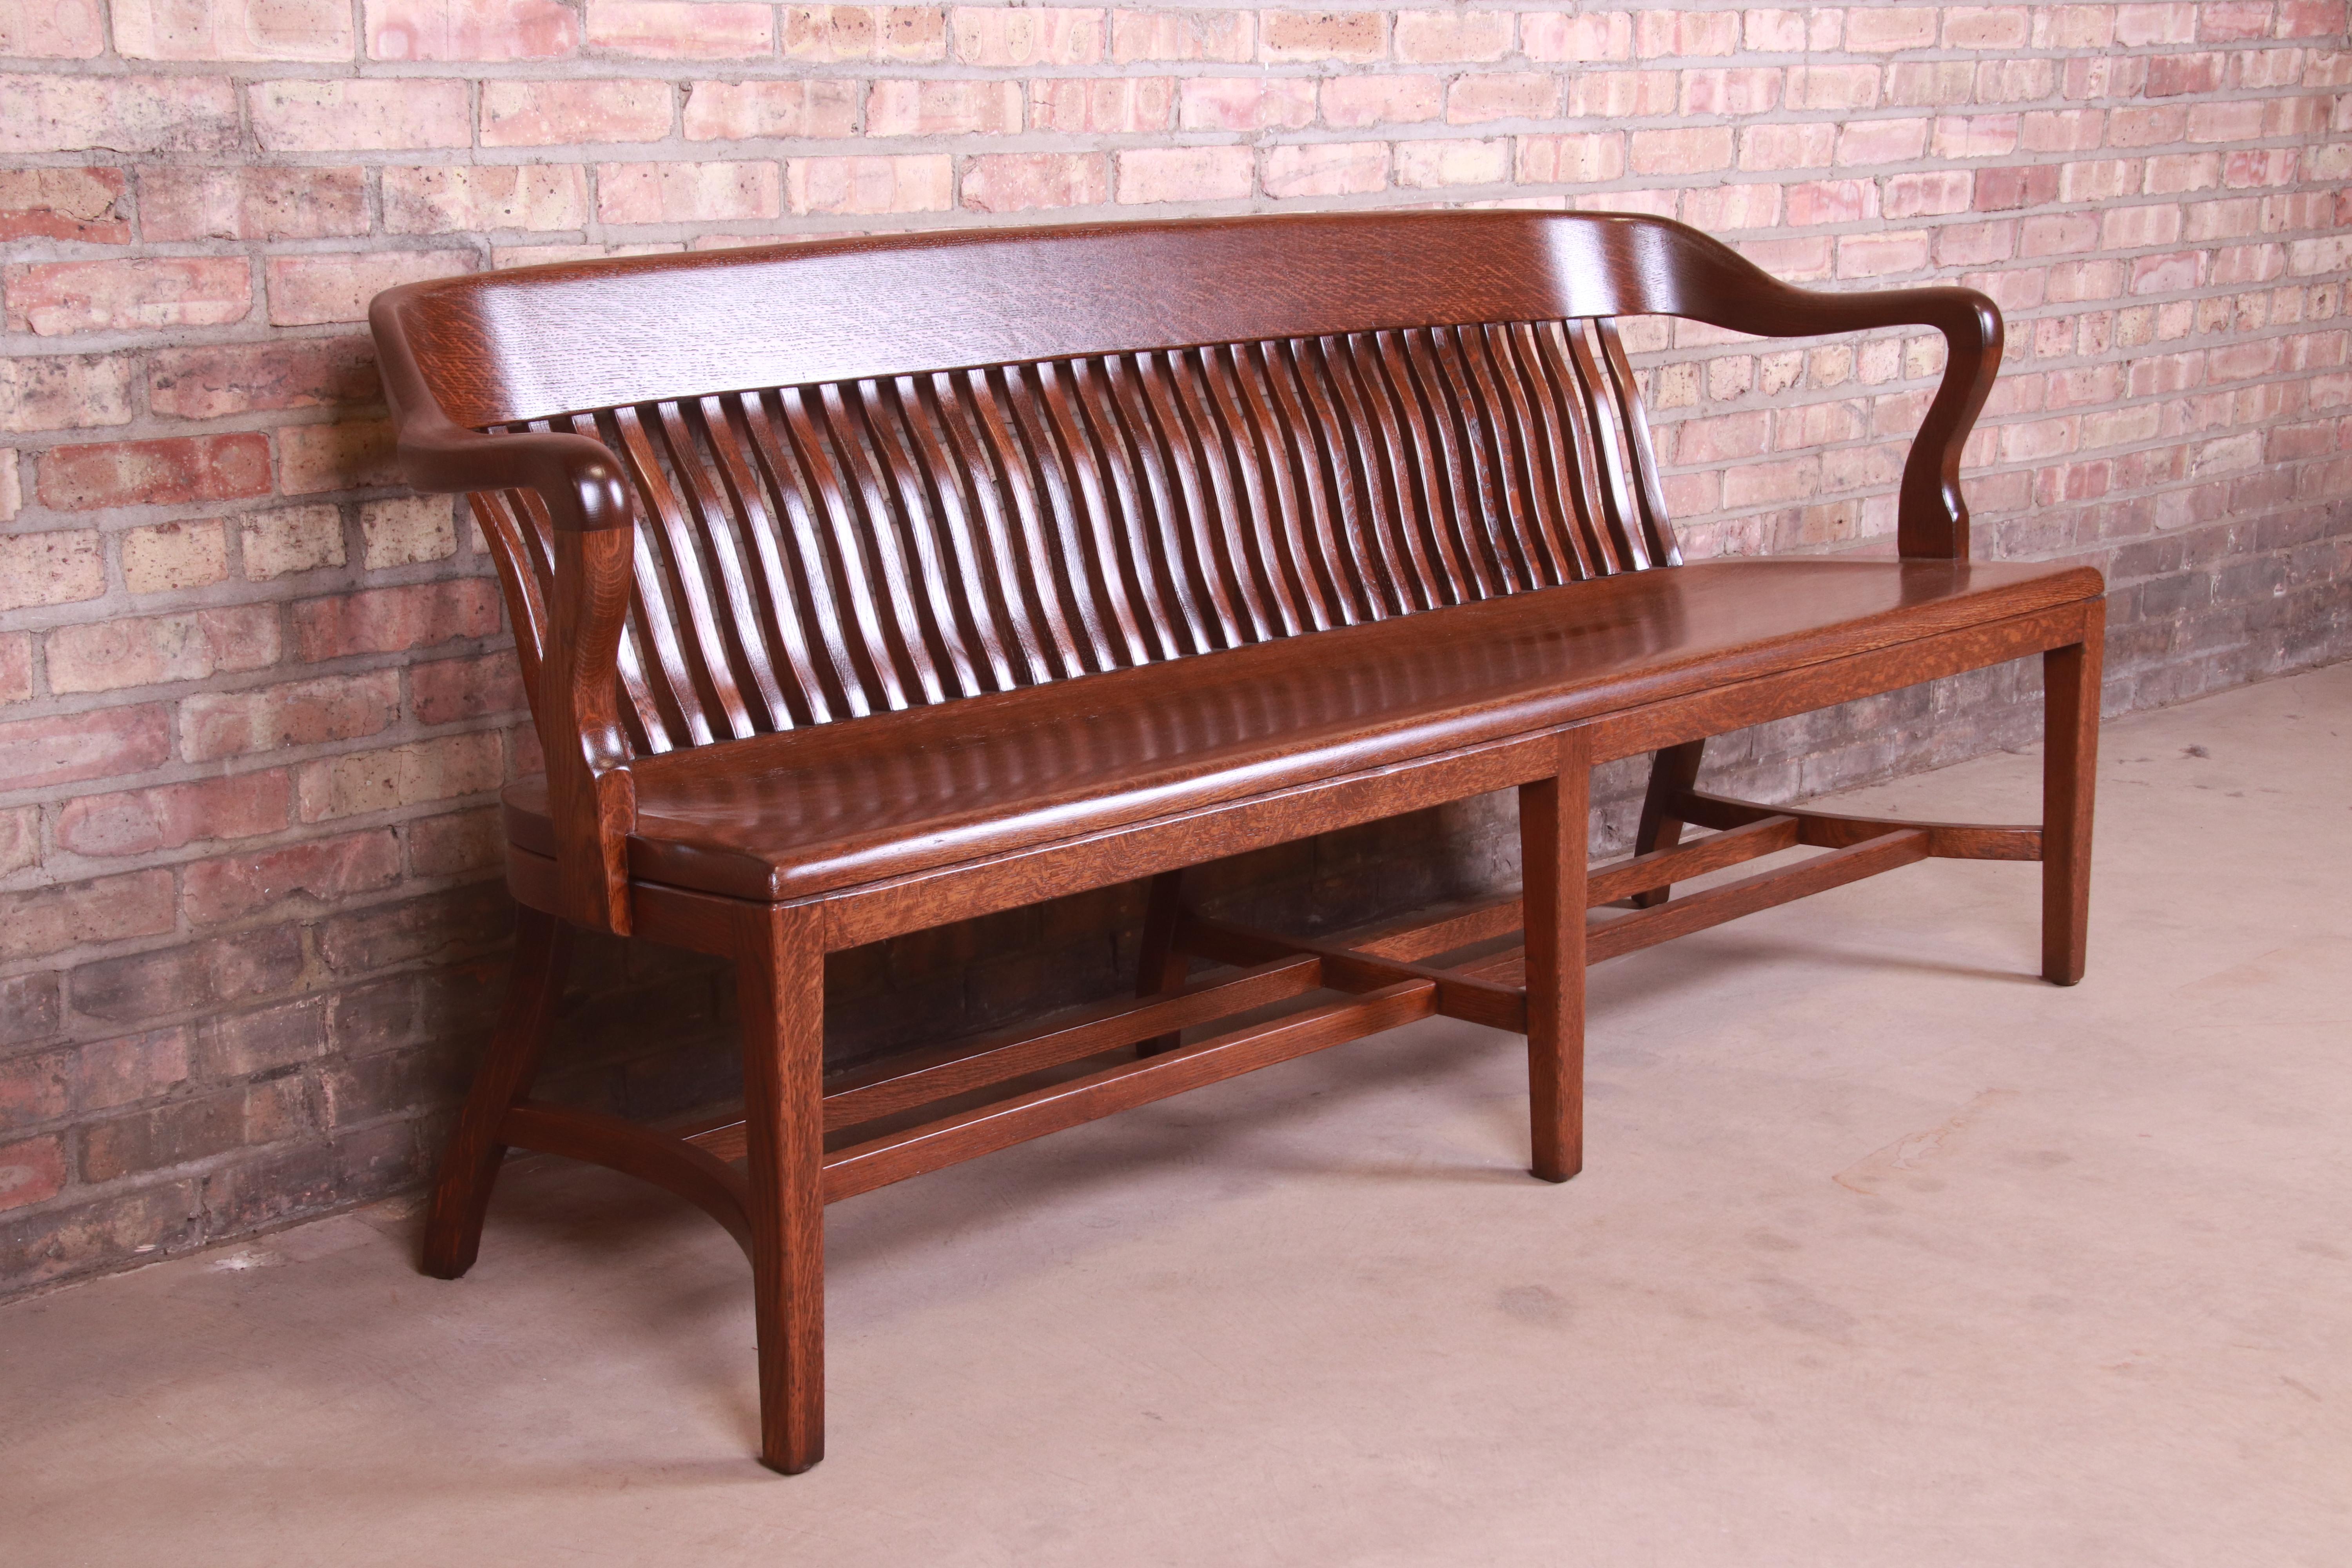 20th Century Antique Solid Oak Lawyer's Bench, Newly Refinished